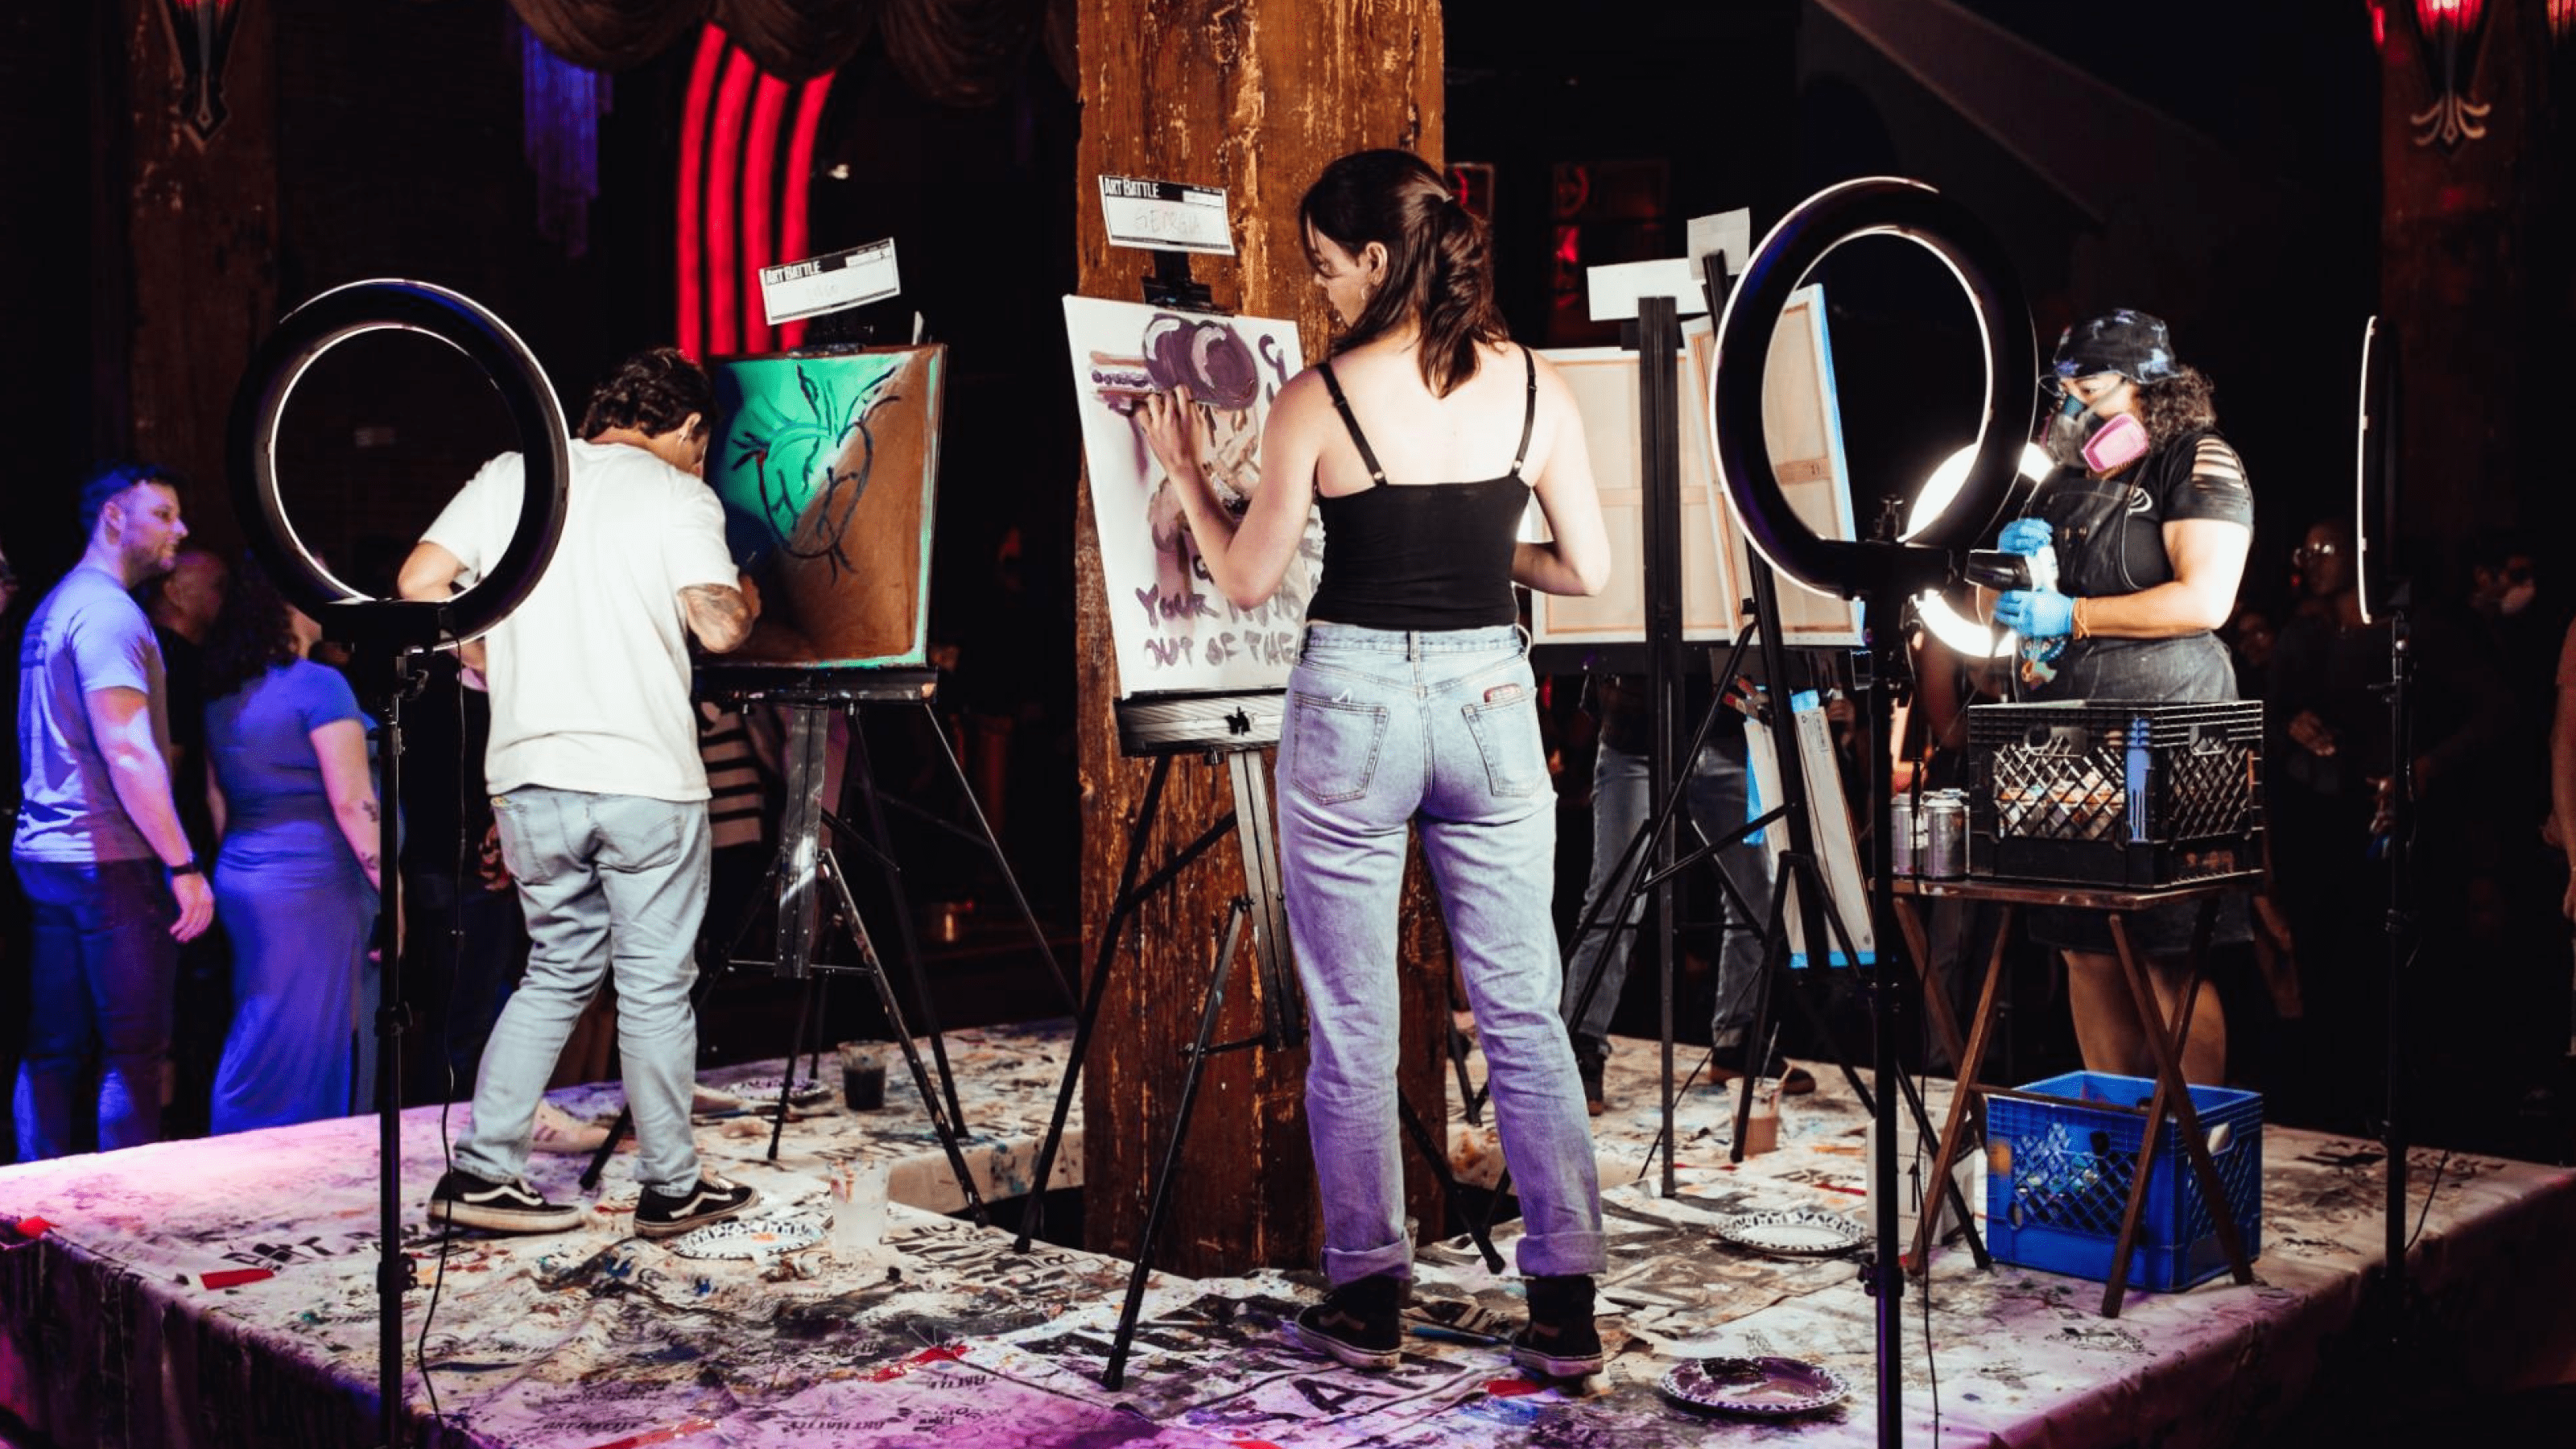 Artists painting together